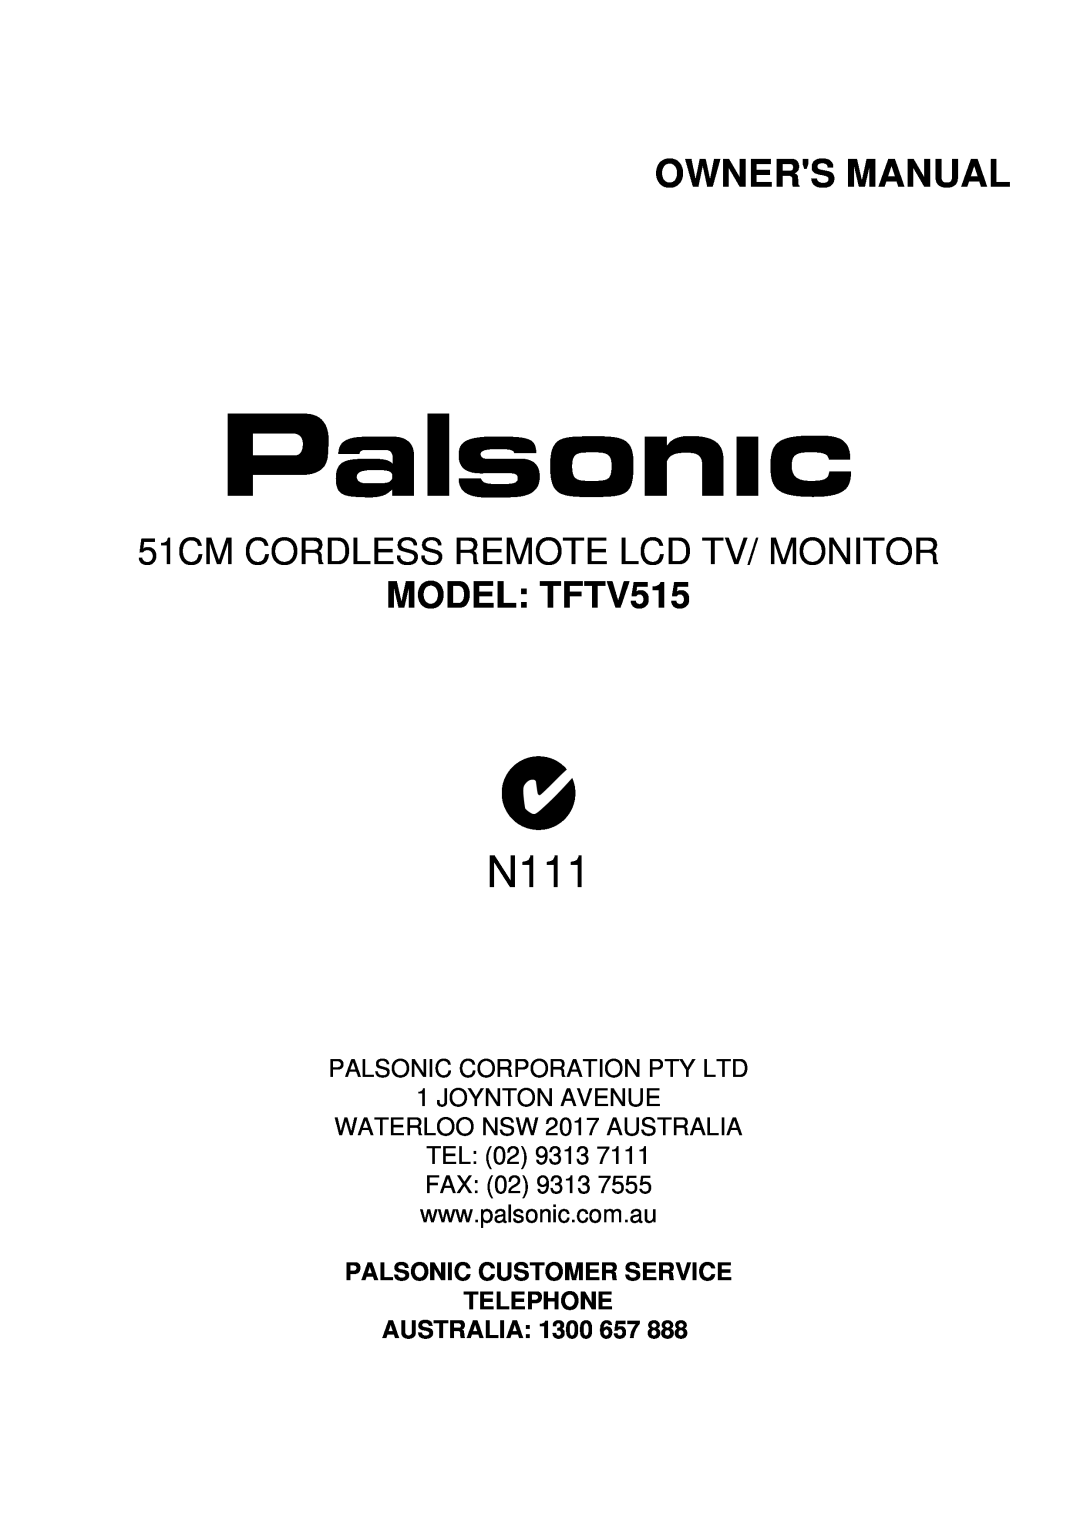 Palsonic owner manual N111, Owners Manual, 51CM CORDLESS REMOTE LCD TV/ MONITOR, MODEL TFTV515 